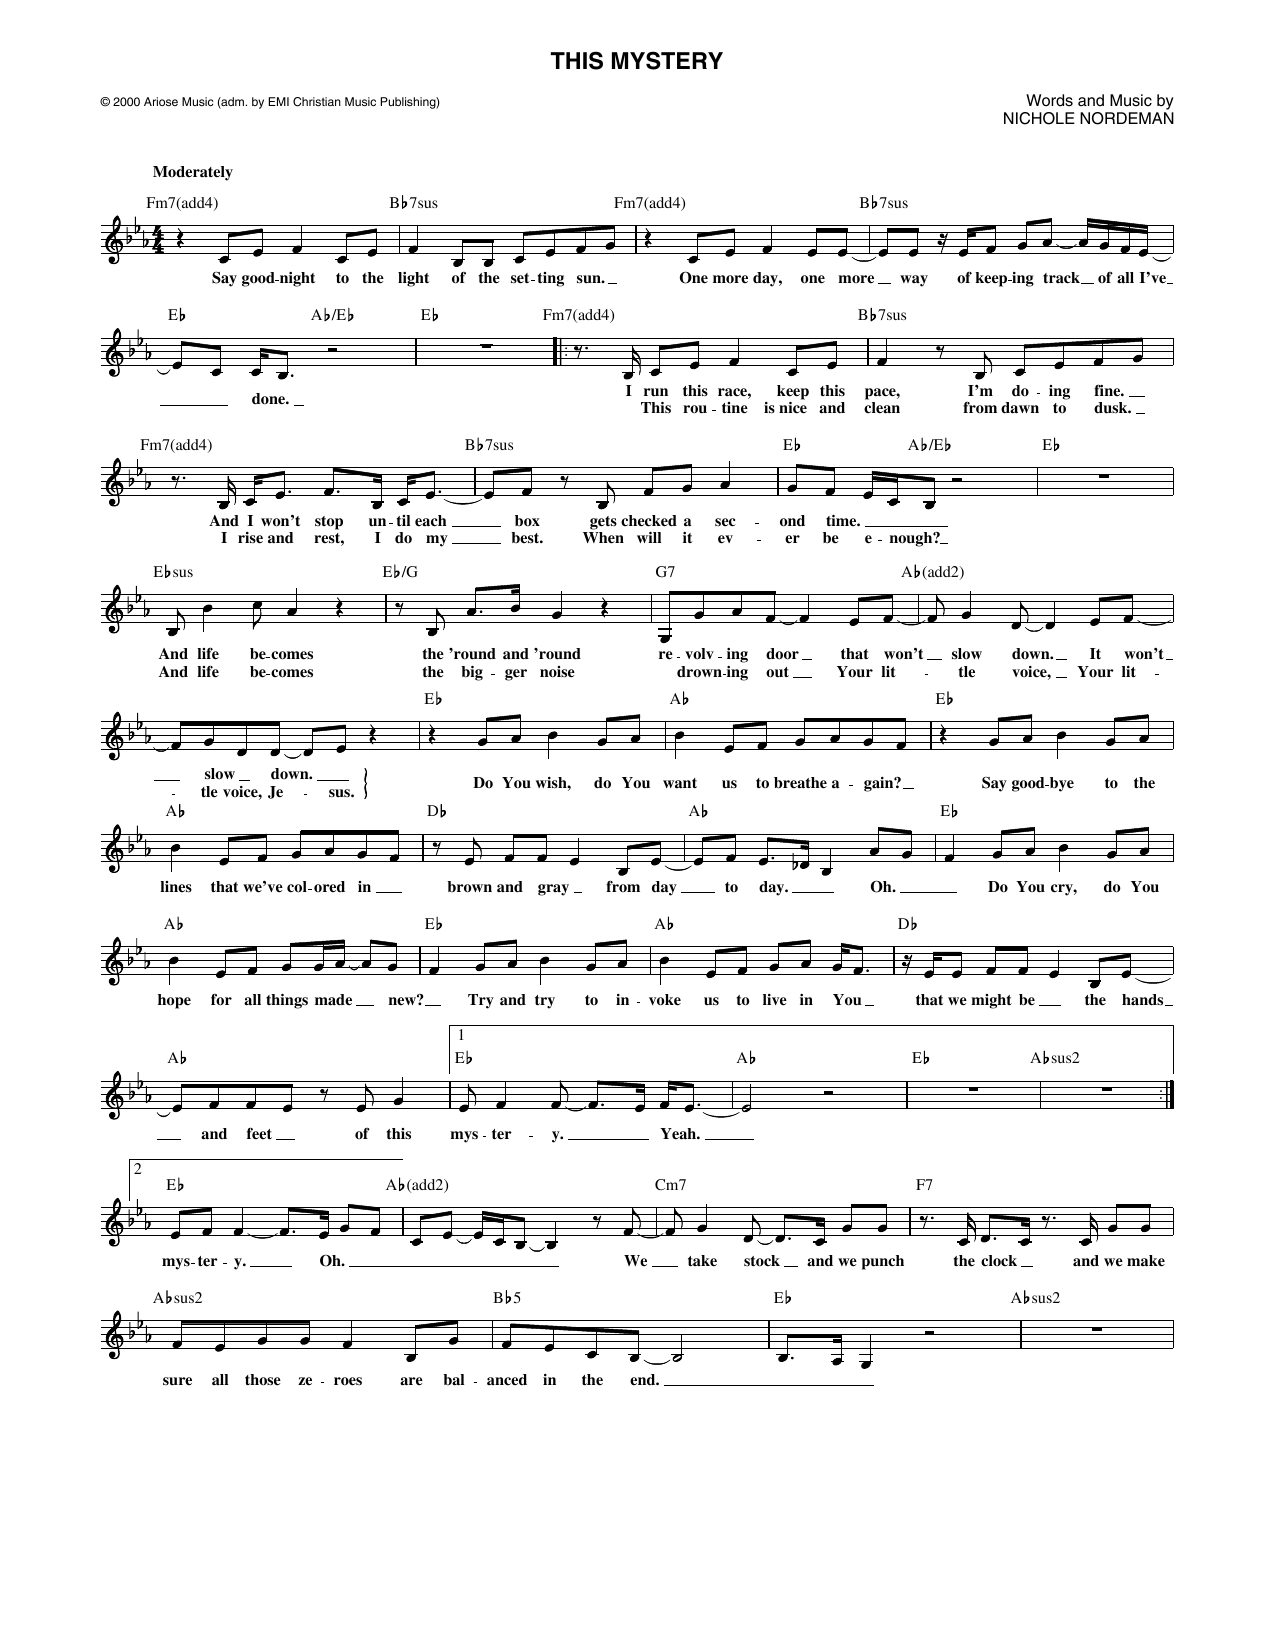 Download Nichole Nordeman This Mystery Sheet Music